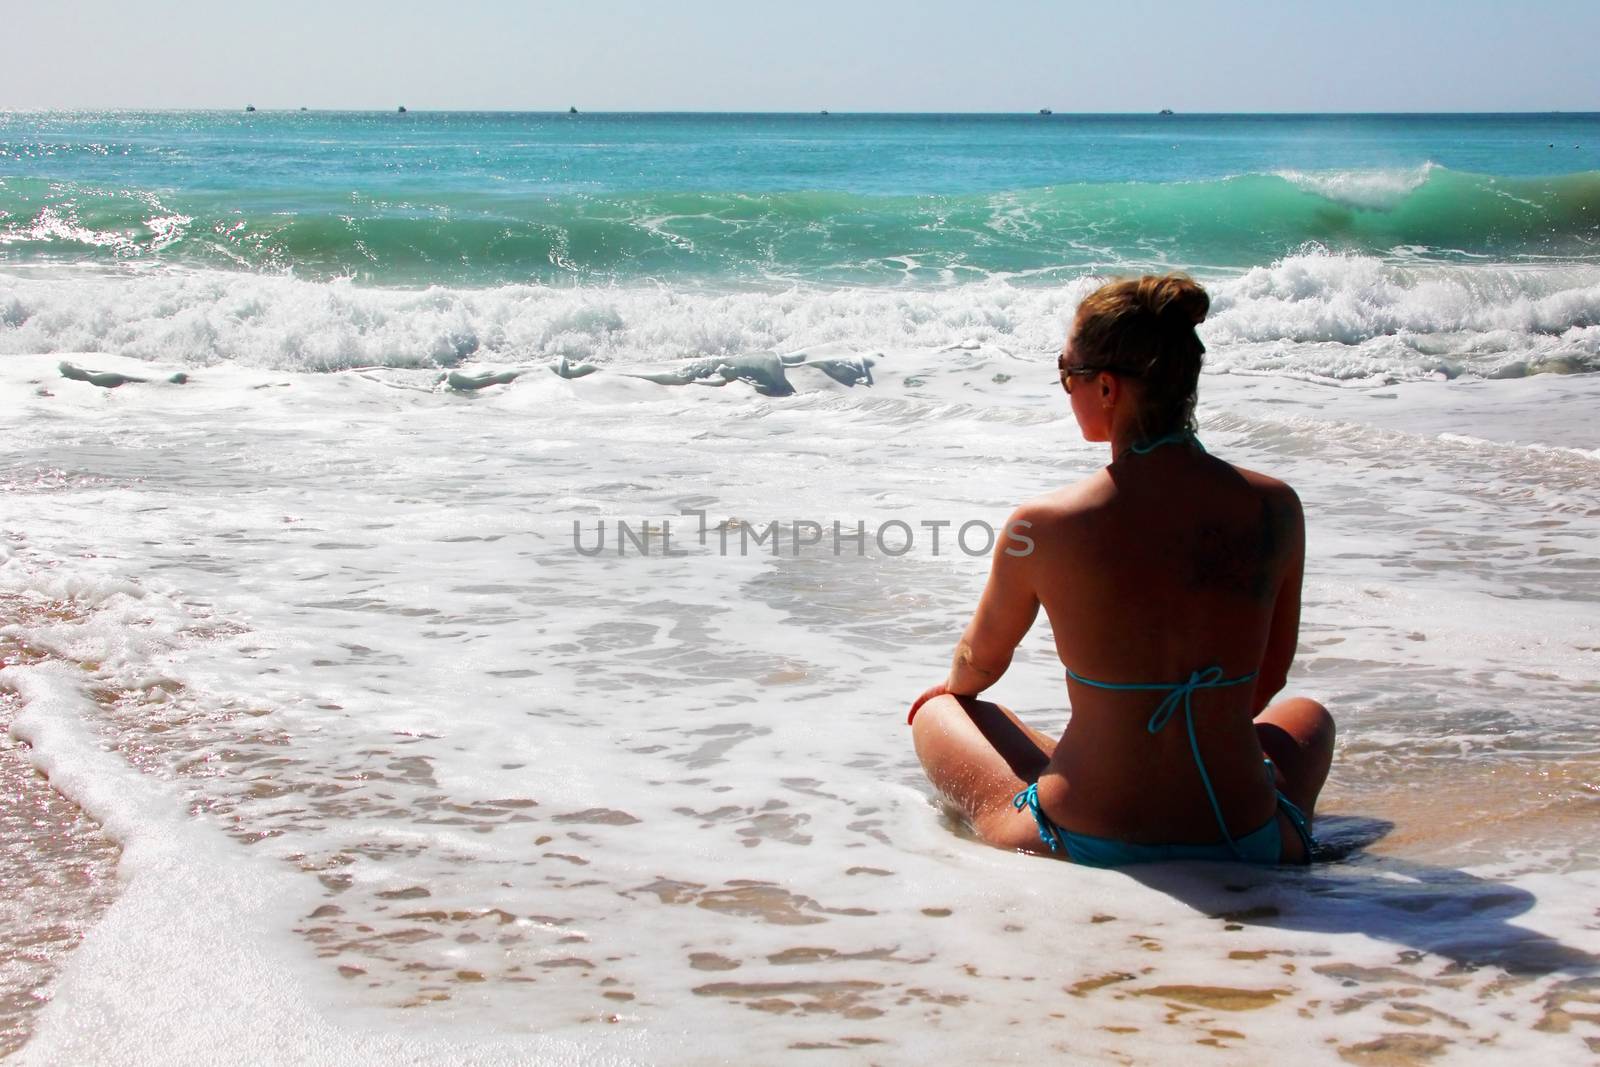 The girl is meditating on the ocean shore. Bali